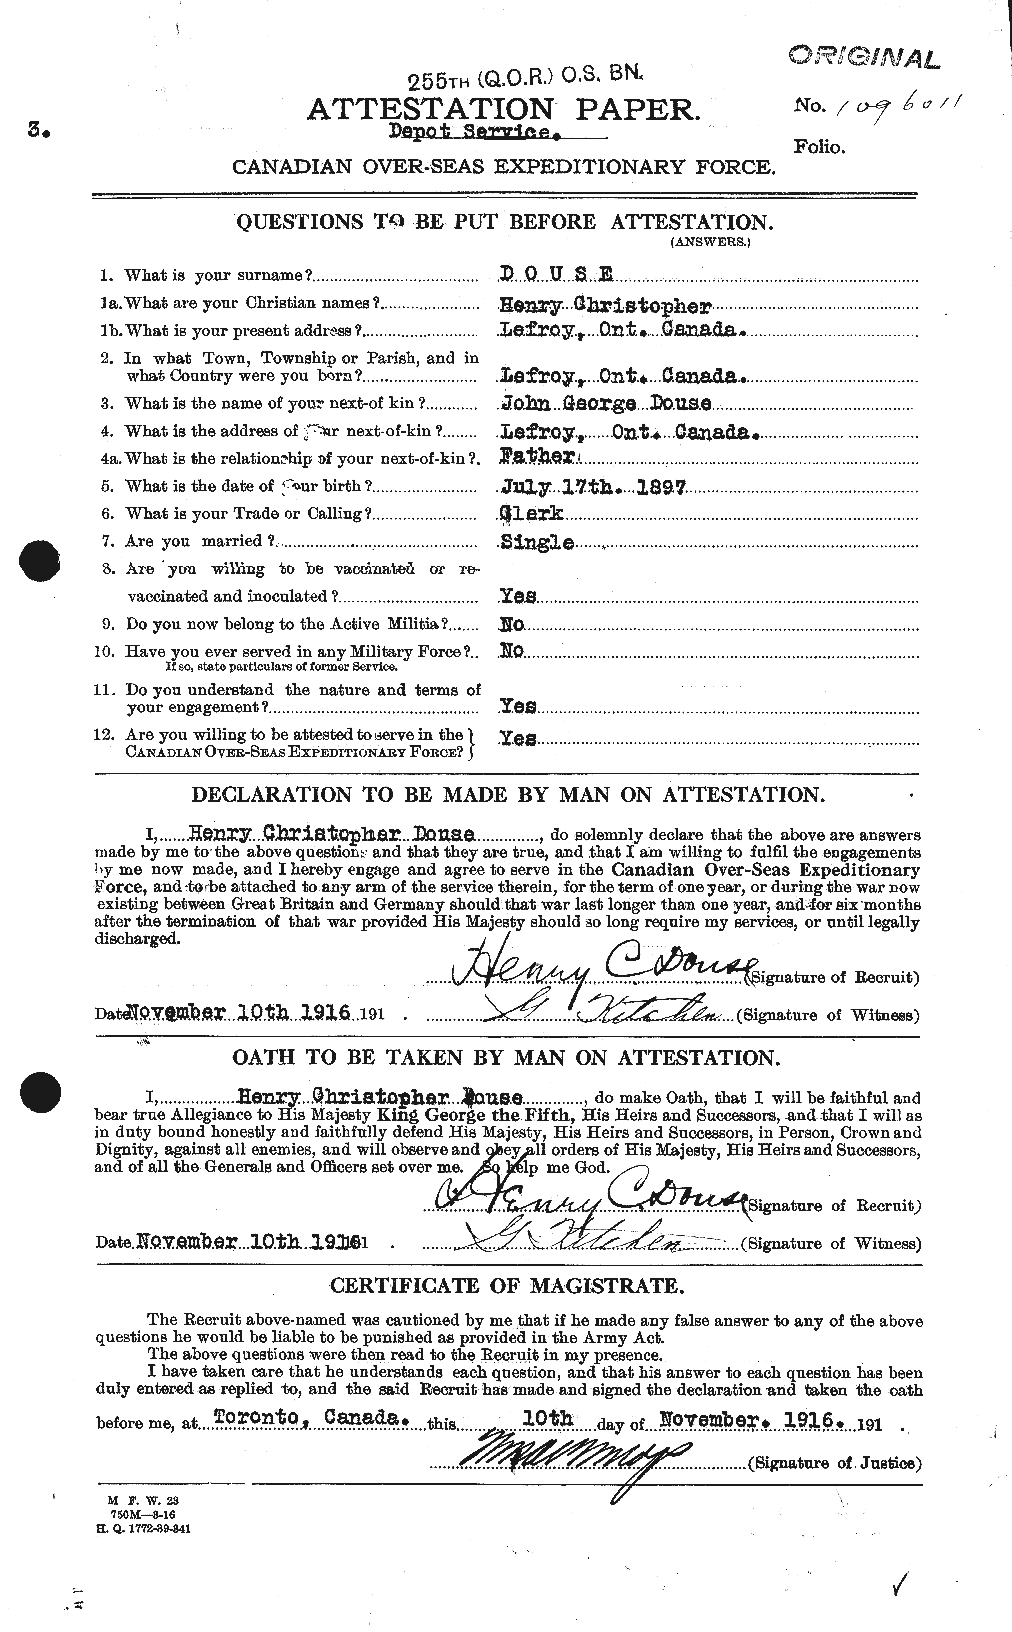 Personnel Records of the First World War - CEF 296894a